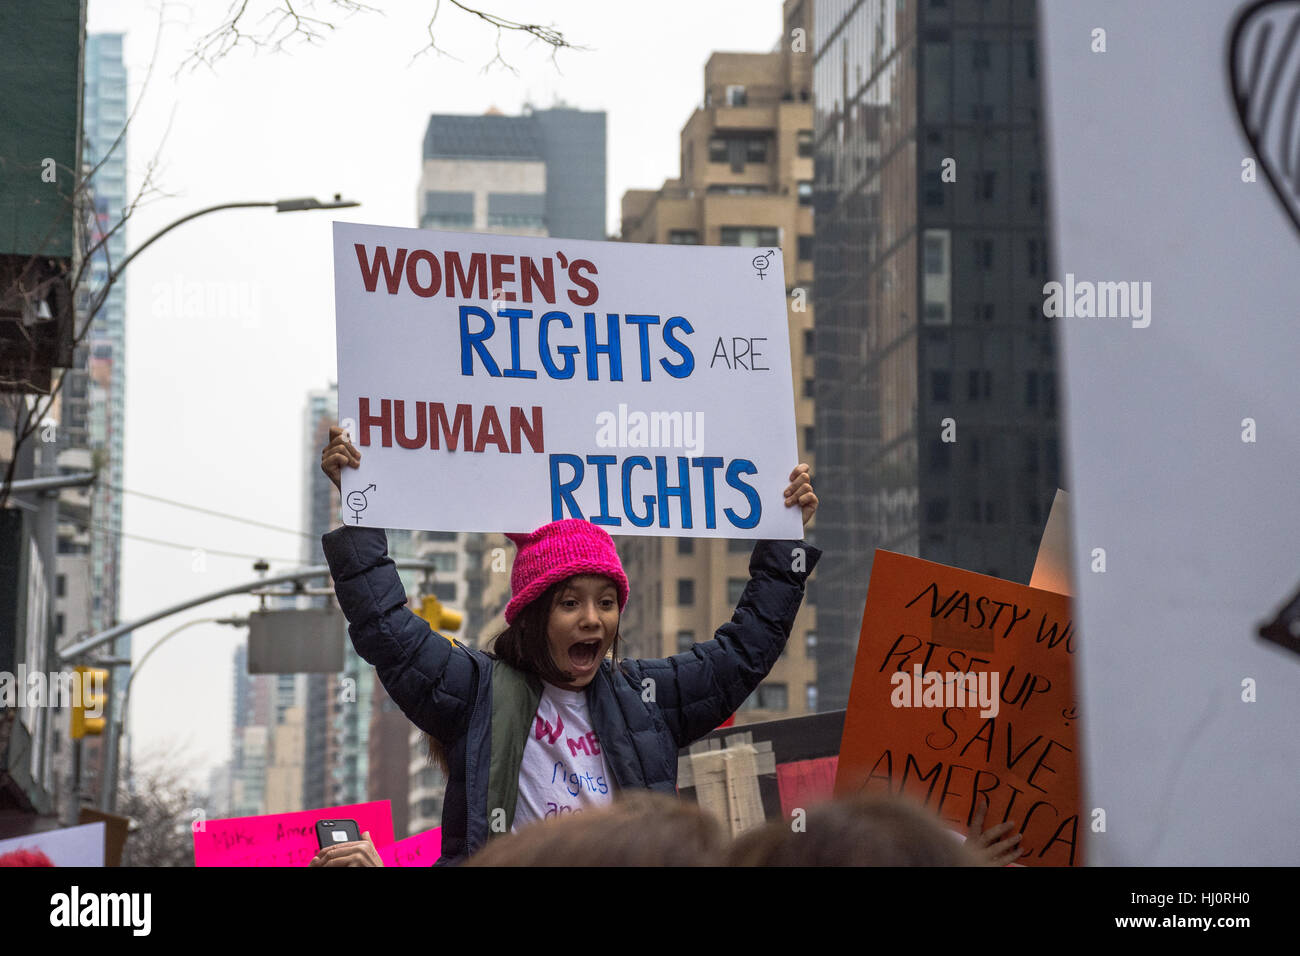 New York, NY, USA. 21st January, 2017. Women's March on NYC. A girl carries a sign during the protest. Credit: Matthew Cherchio/Alamy Live News Stock Photo